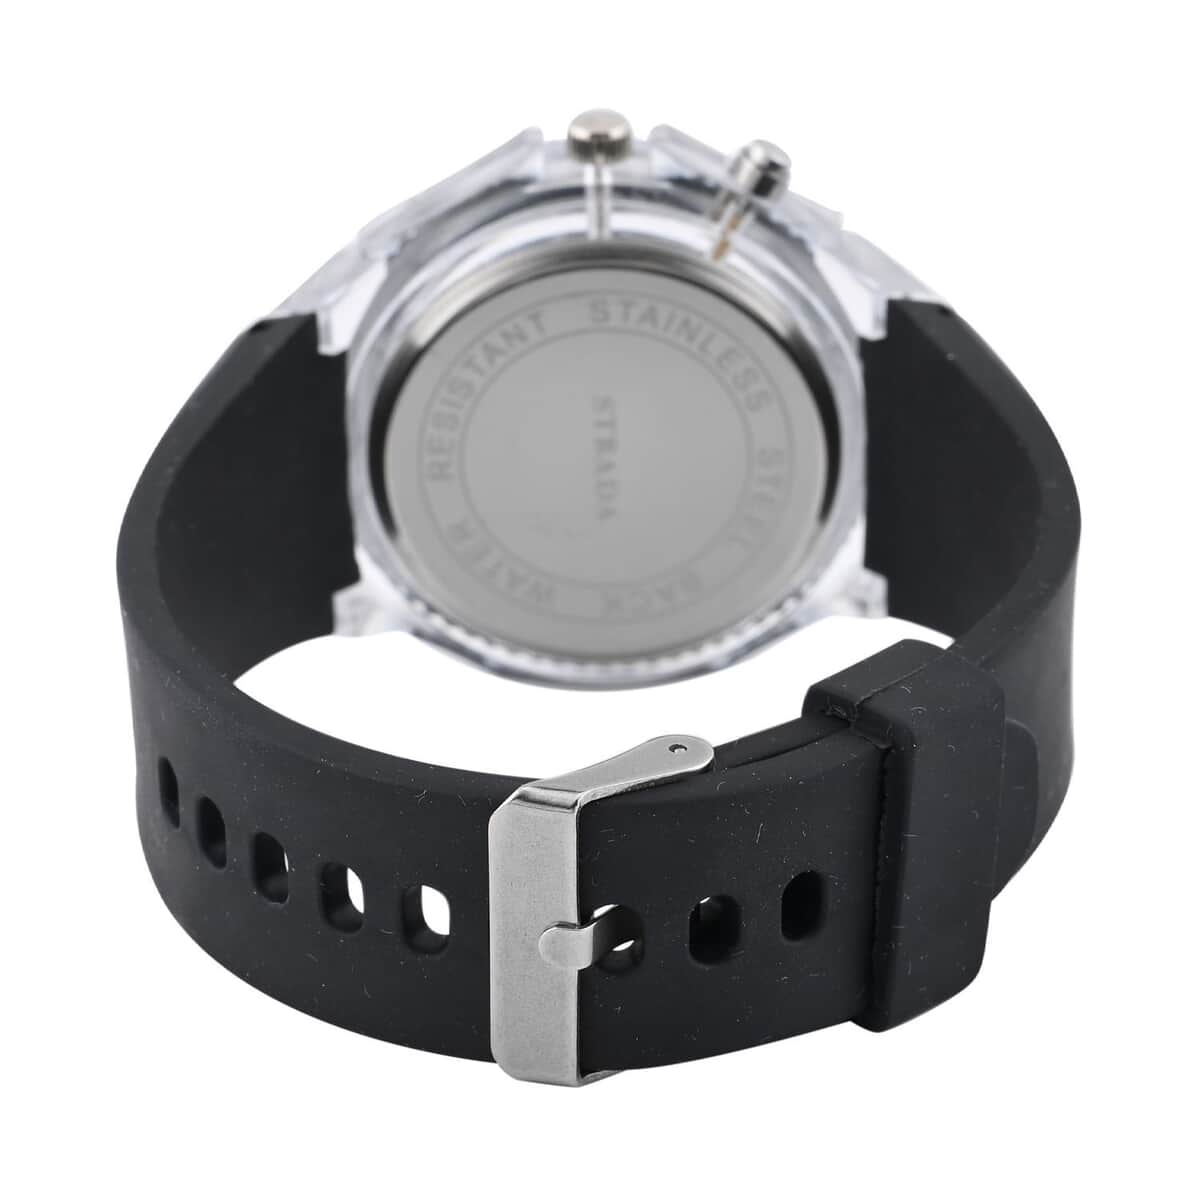 Strada Austrian Crystal Japanese Movement Watch with Black Silicone Strap (25.40 mm) (6.0-7.75 Inches) image number 5